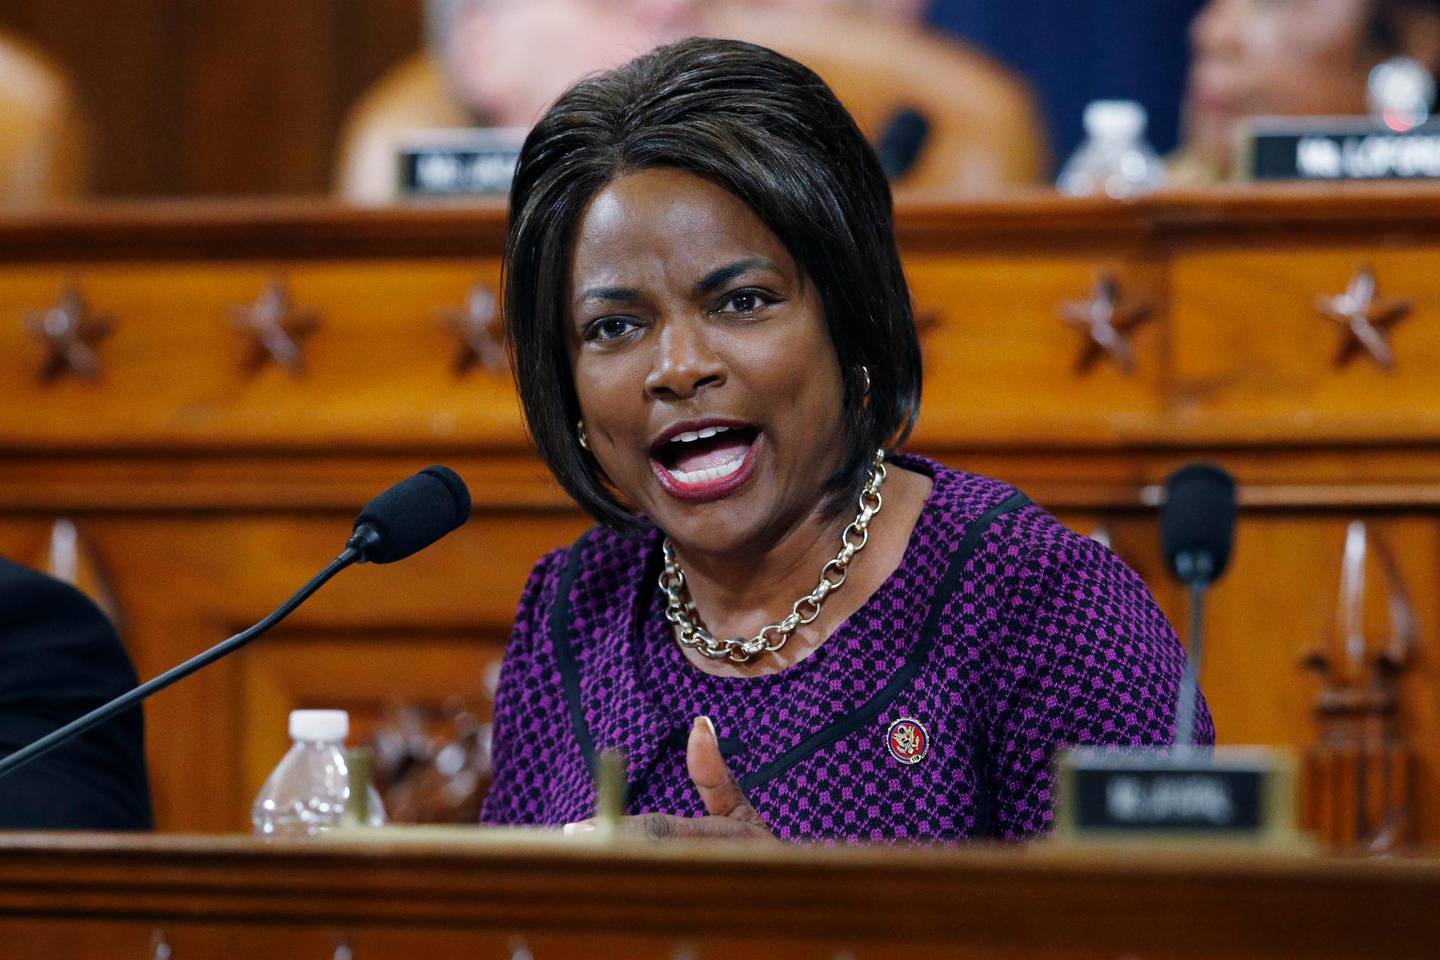 FILE - In this Dec. 11, 2019, file photo, Rep. Val Demings, D-Fla., gives her opening statement during a House Judiciary Committee markup of the articles of impeachment against President Donald Trump on Capitol Hill in Washington. Democratic presidential candidate former Vice President Joe Bidens search for a running mate is entering a second round of vetting for a dwindling list of potential vice presidential nominees, with several black women in strong contention. (AP Photo/Patrick Semansky, File)